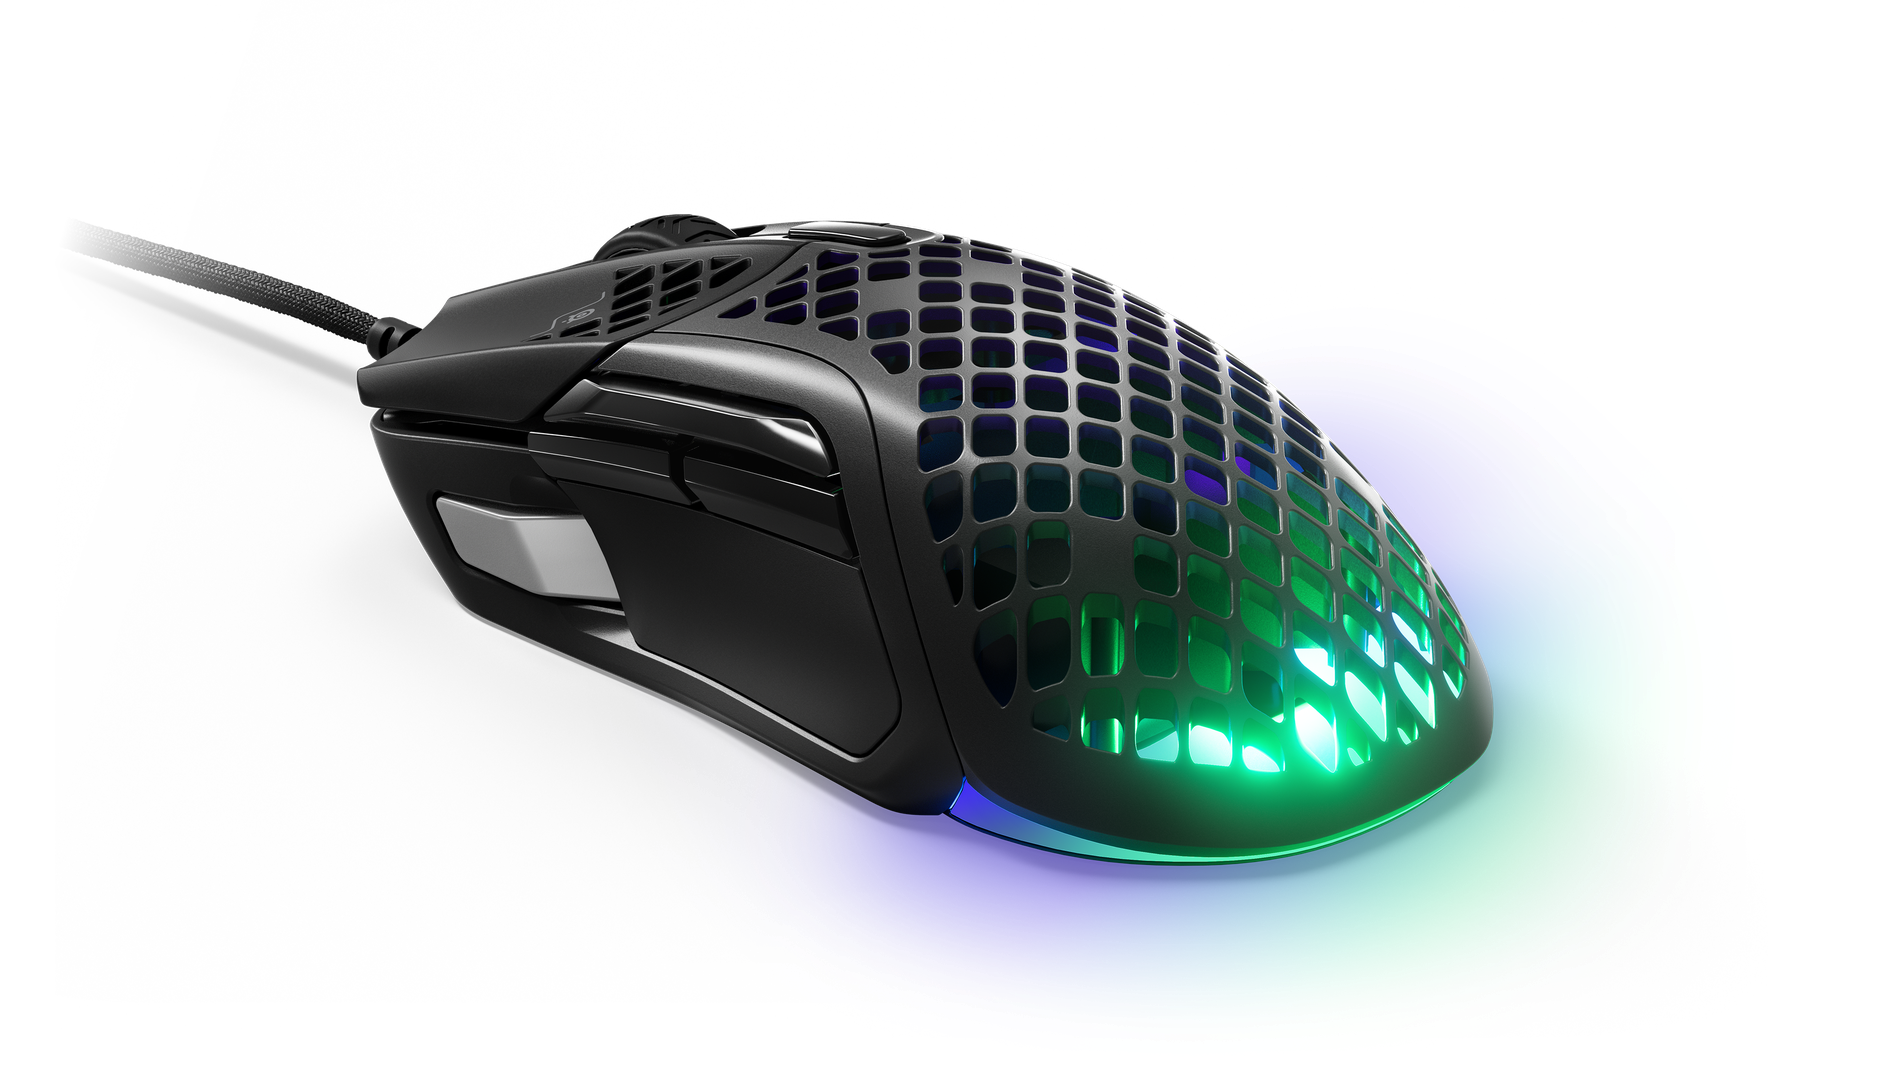 Steelseries - Aerox 5 - Gaming Mouse